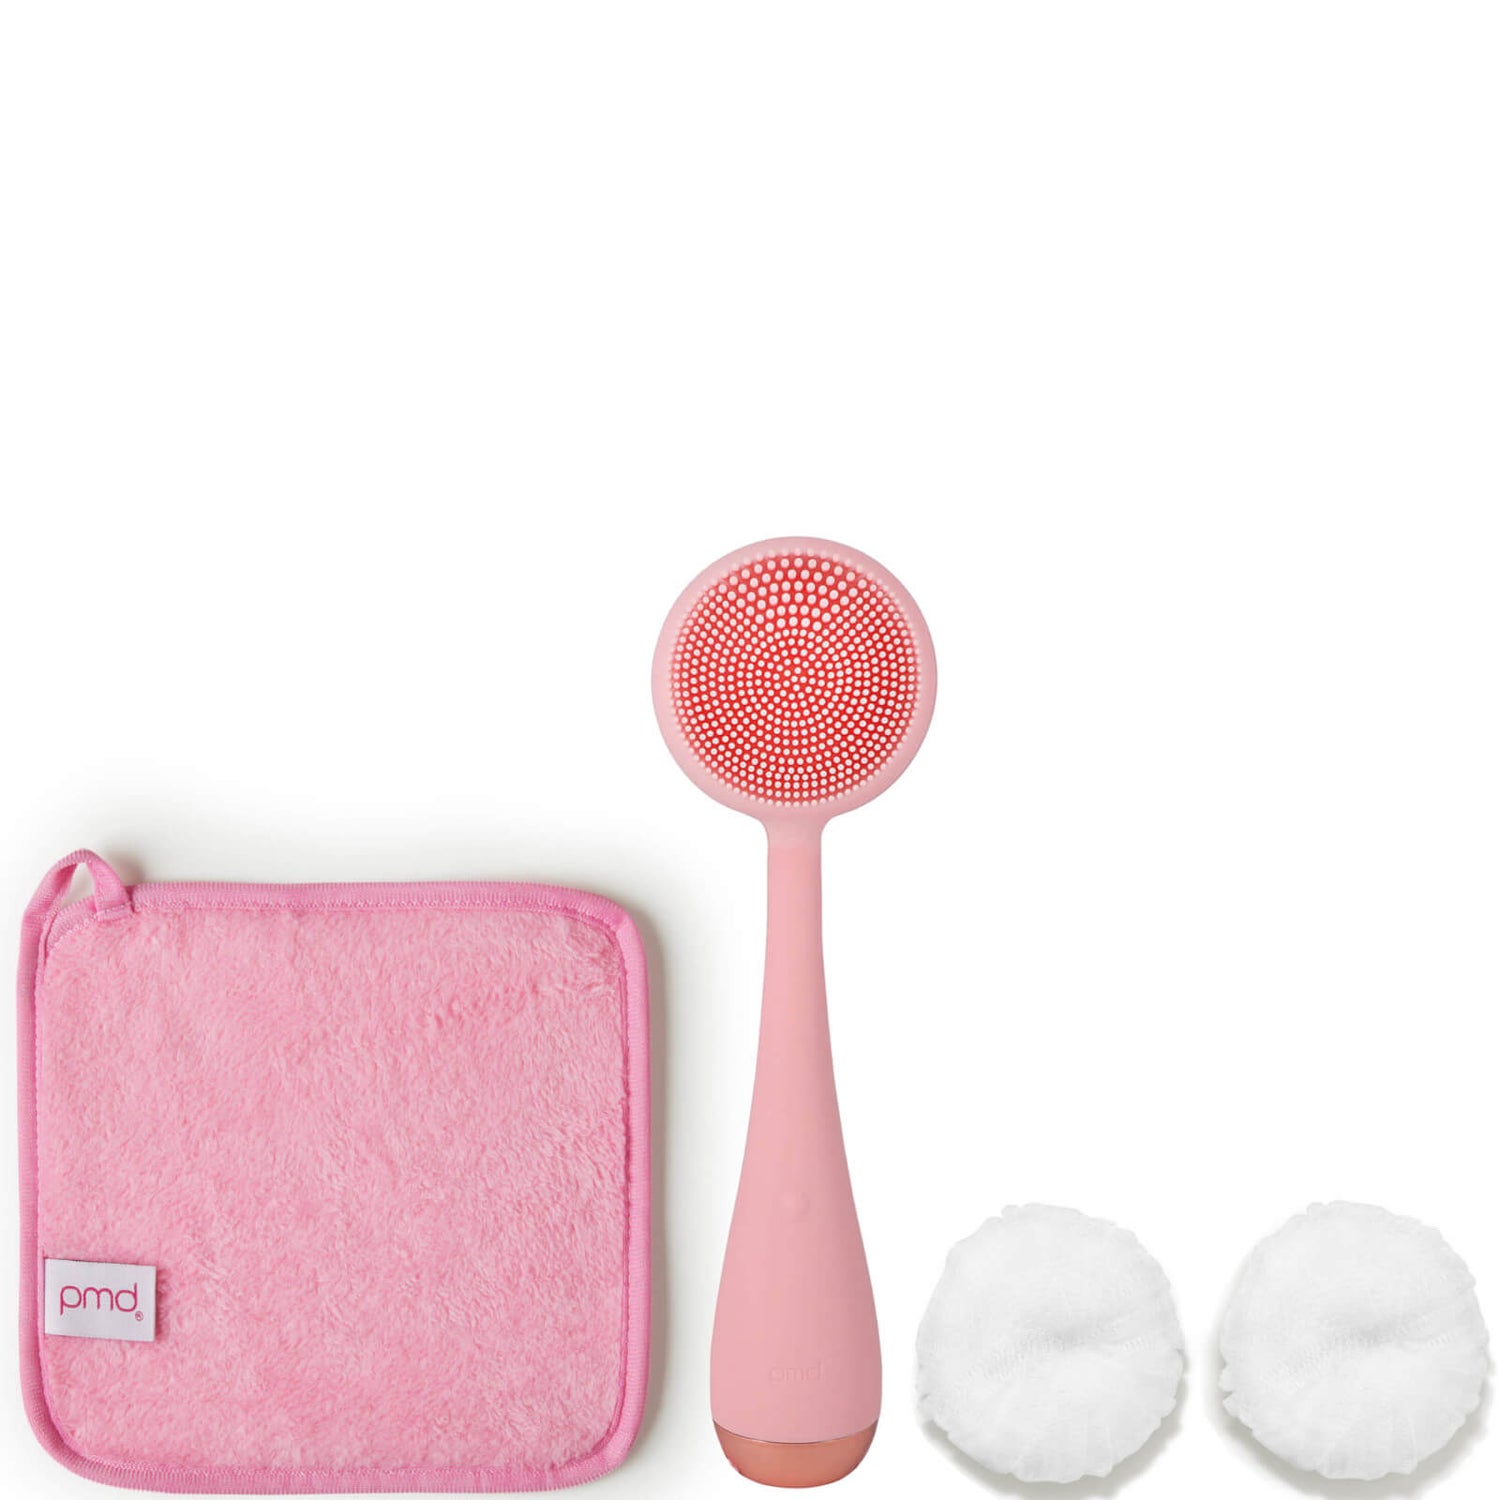 Exclusive PMD Full Body Clean Set (Worth $214.00)